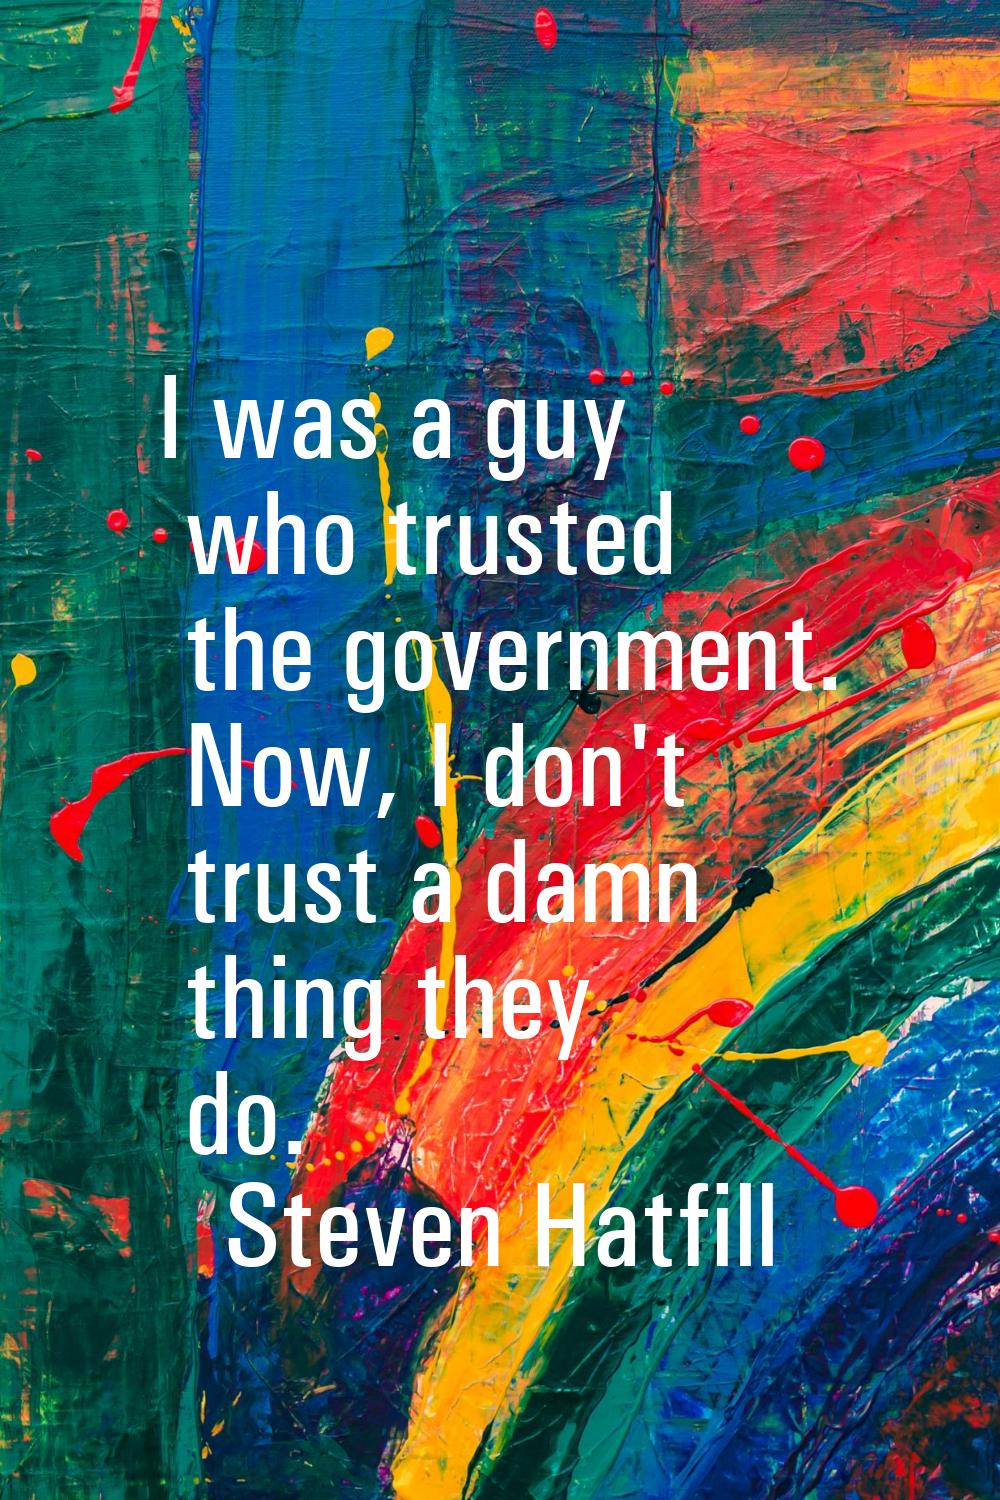 I was a guy who trusted the government. Now, I don't trust a damn thing they do.